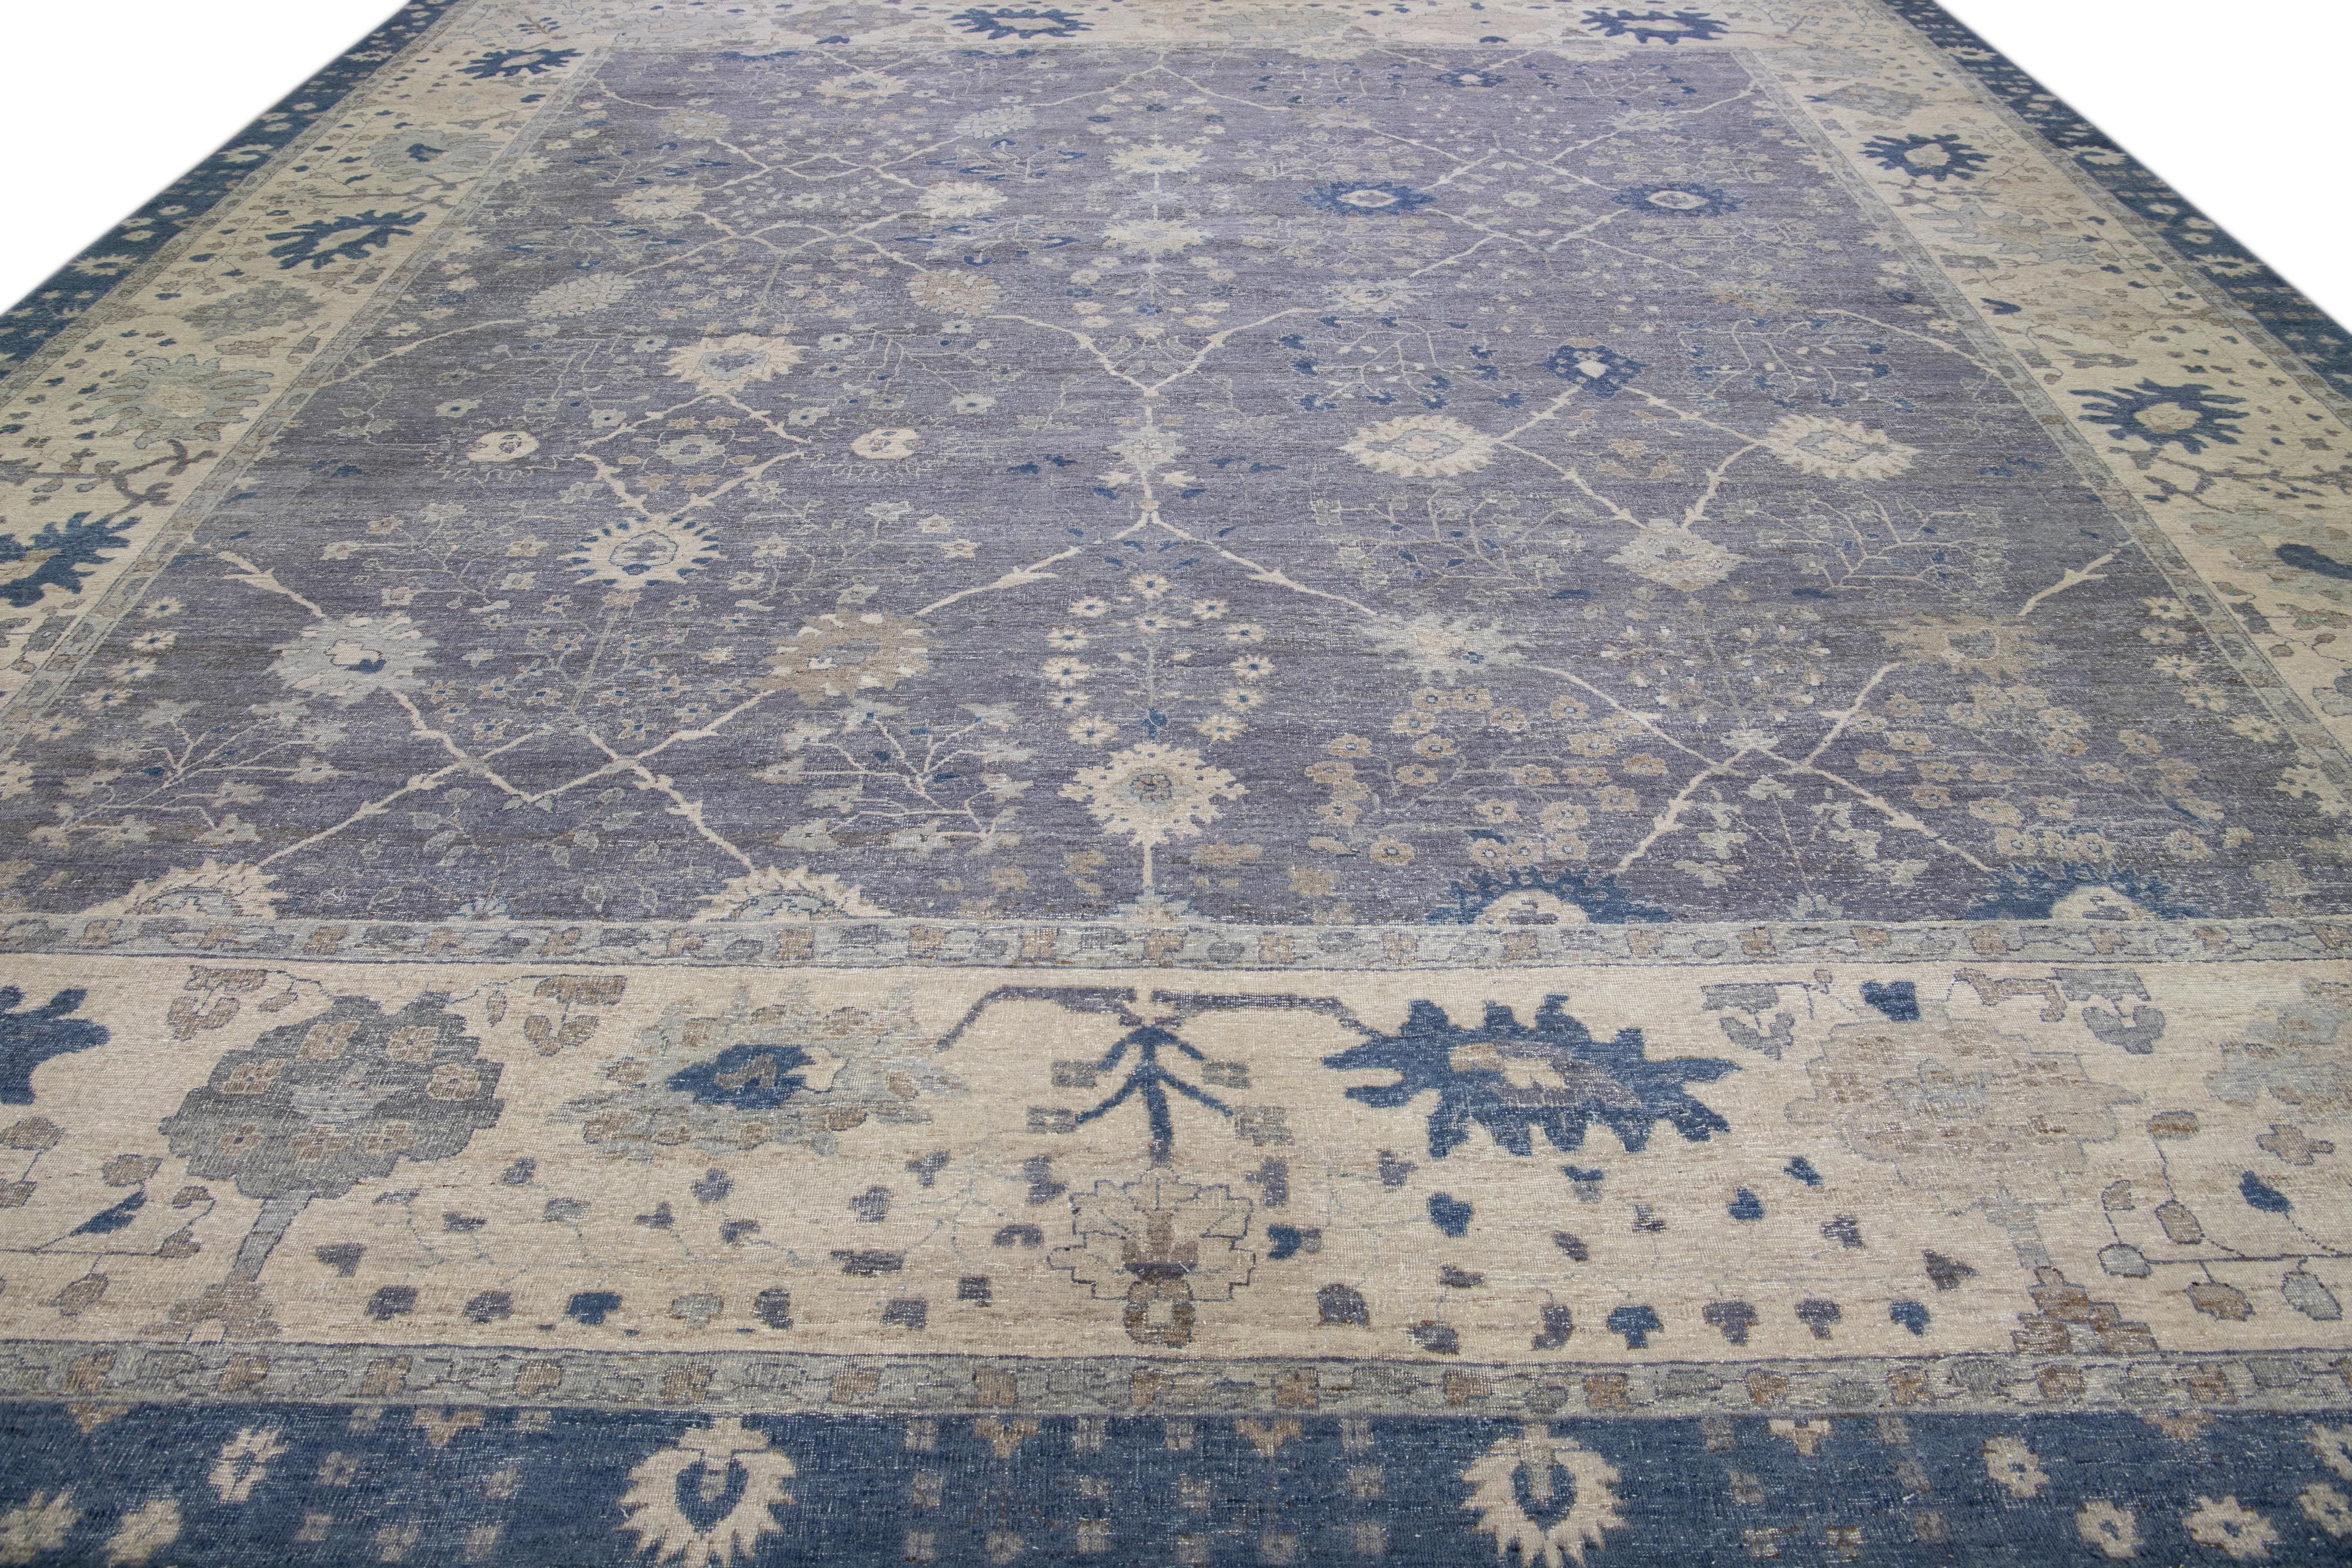 Apadana's Artisan Line is an antique rug reimaging with an elegant way to inject a striking antique aesthetic into a space. This line of rugs is decidedly unique and reimagines what an antique rug look can be. Every single piece from our Artisan